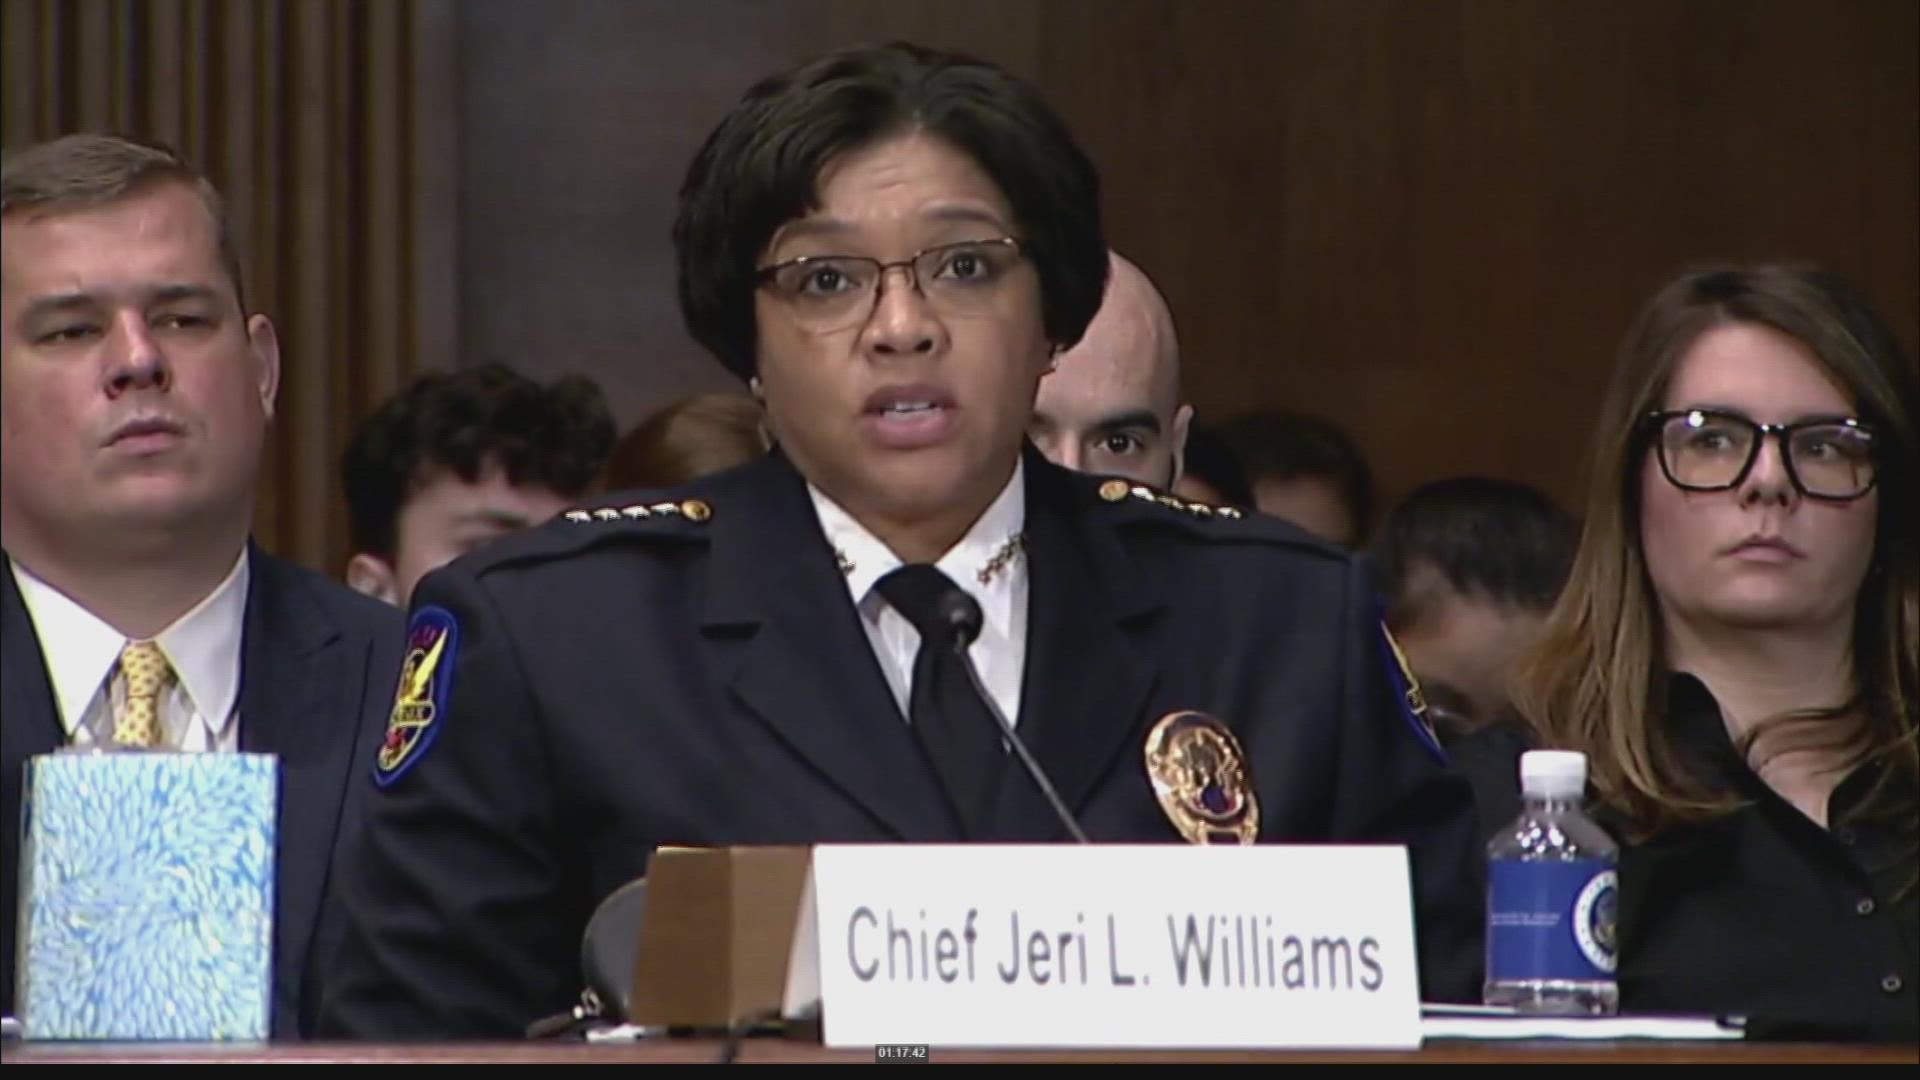 Phoenix Police Chief Jerri Williams spoke on Capitol Hill on Wednesday. She spoke before the judiciary committee on protecting children from gun violence.